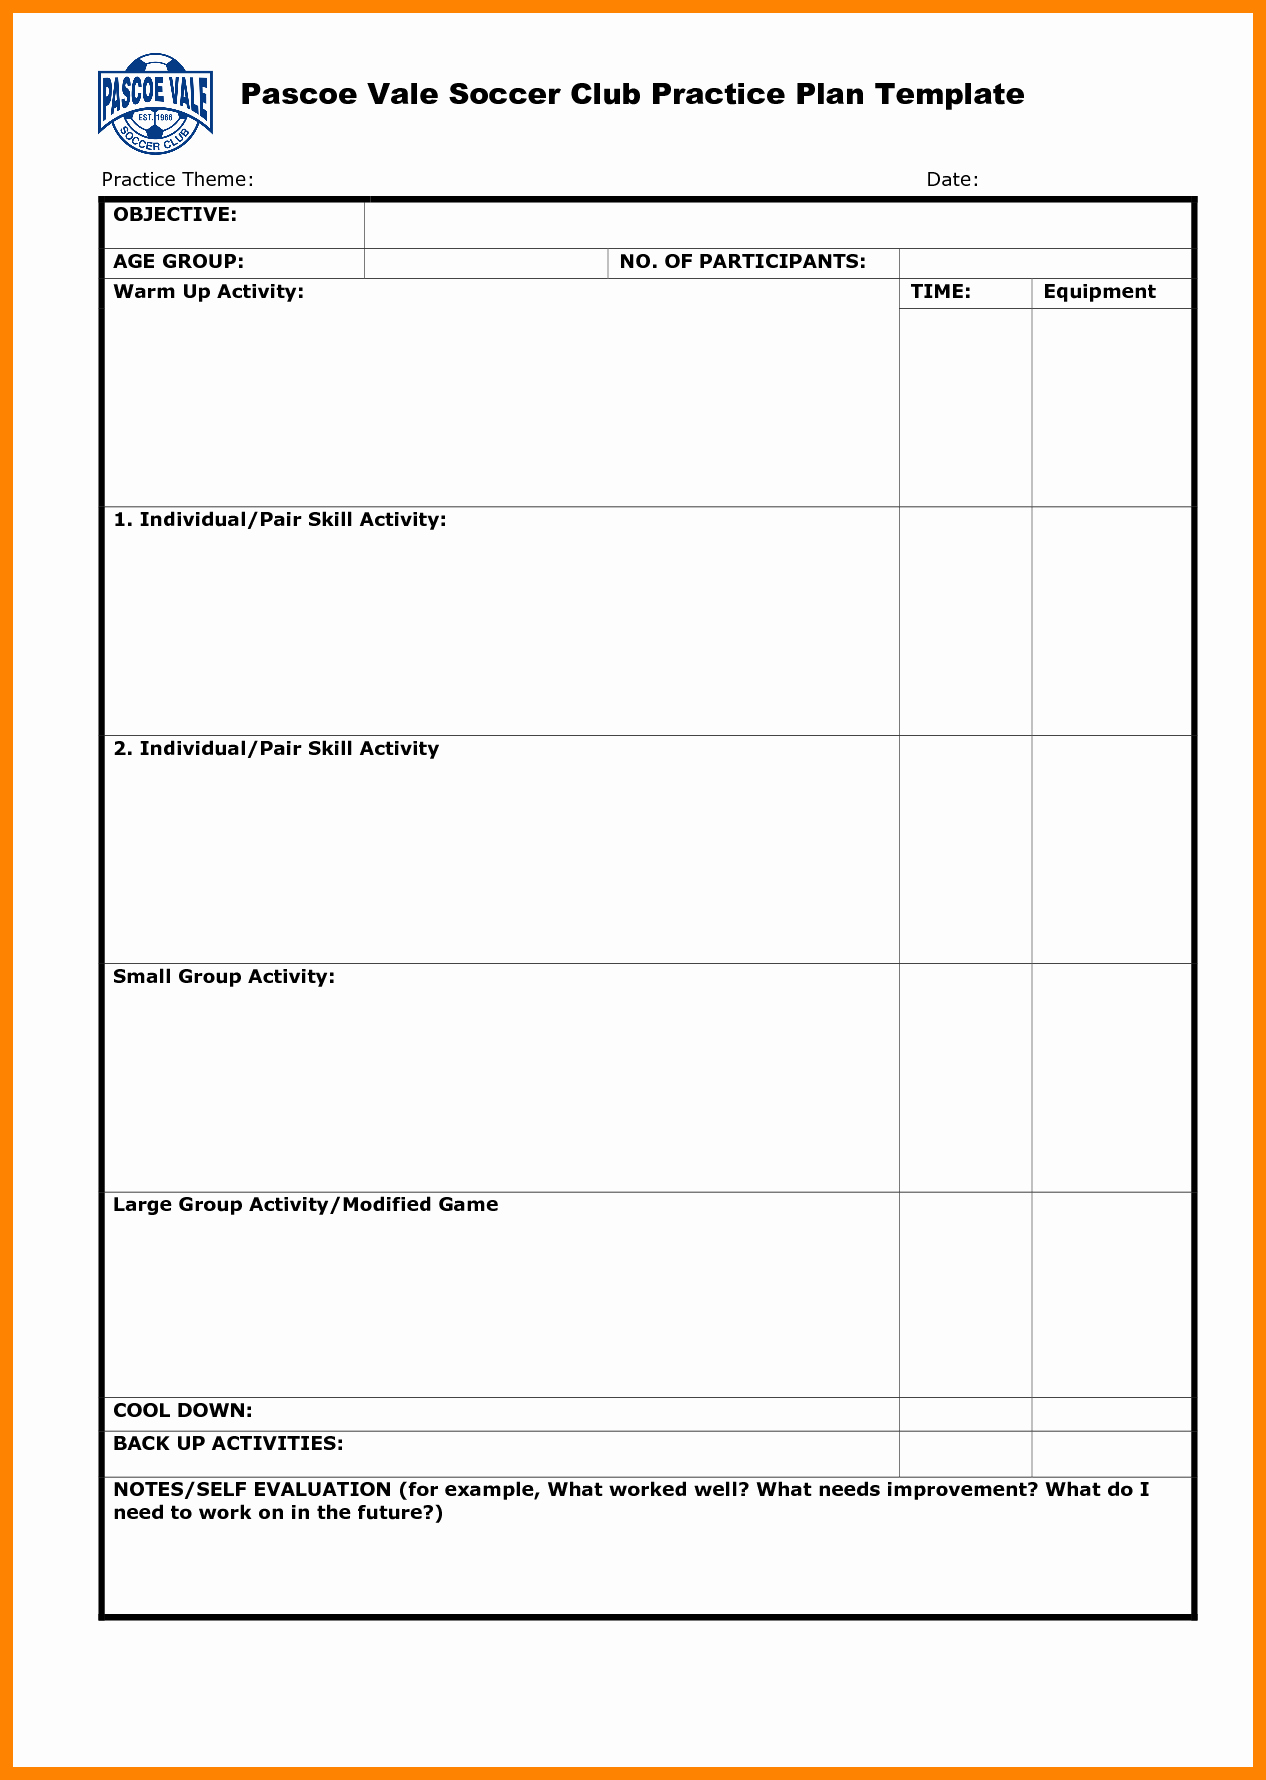 30 images of soccer practice plan template 5250